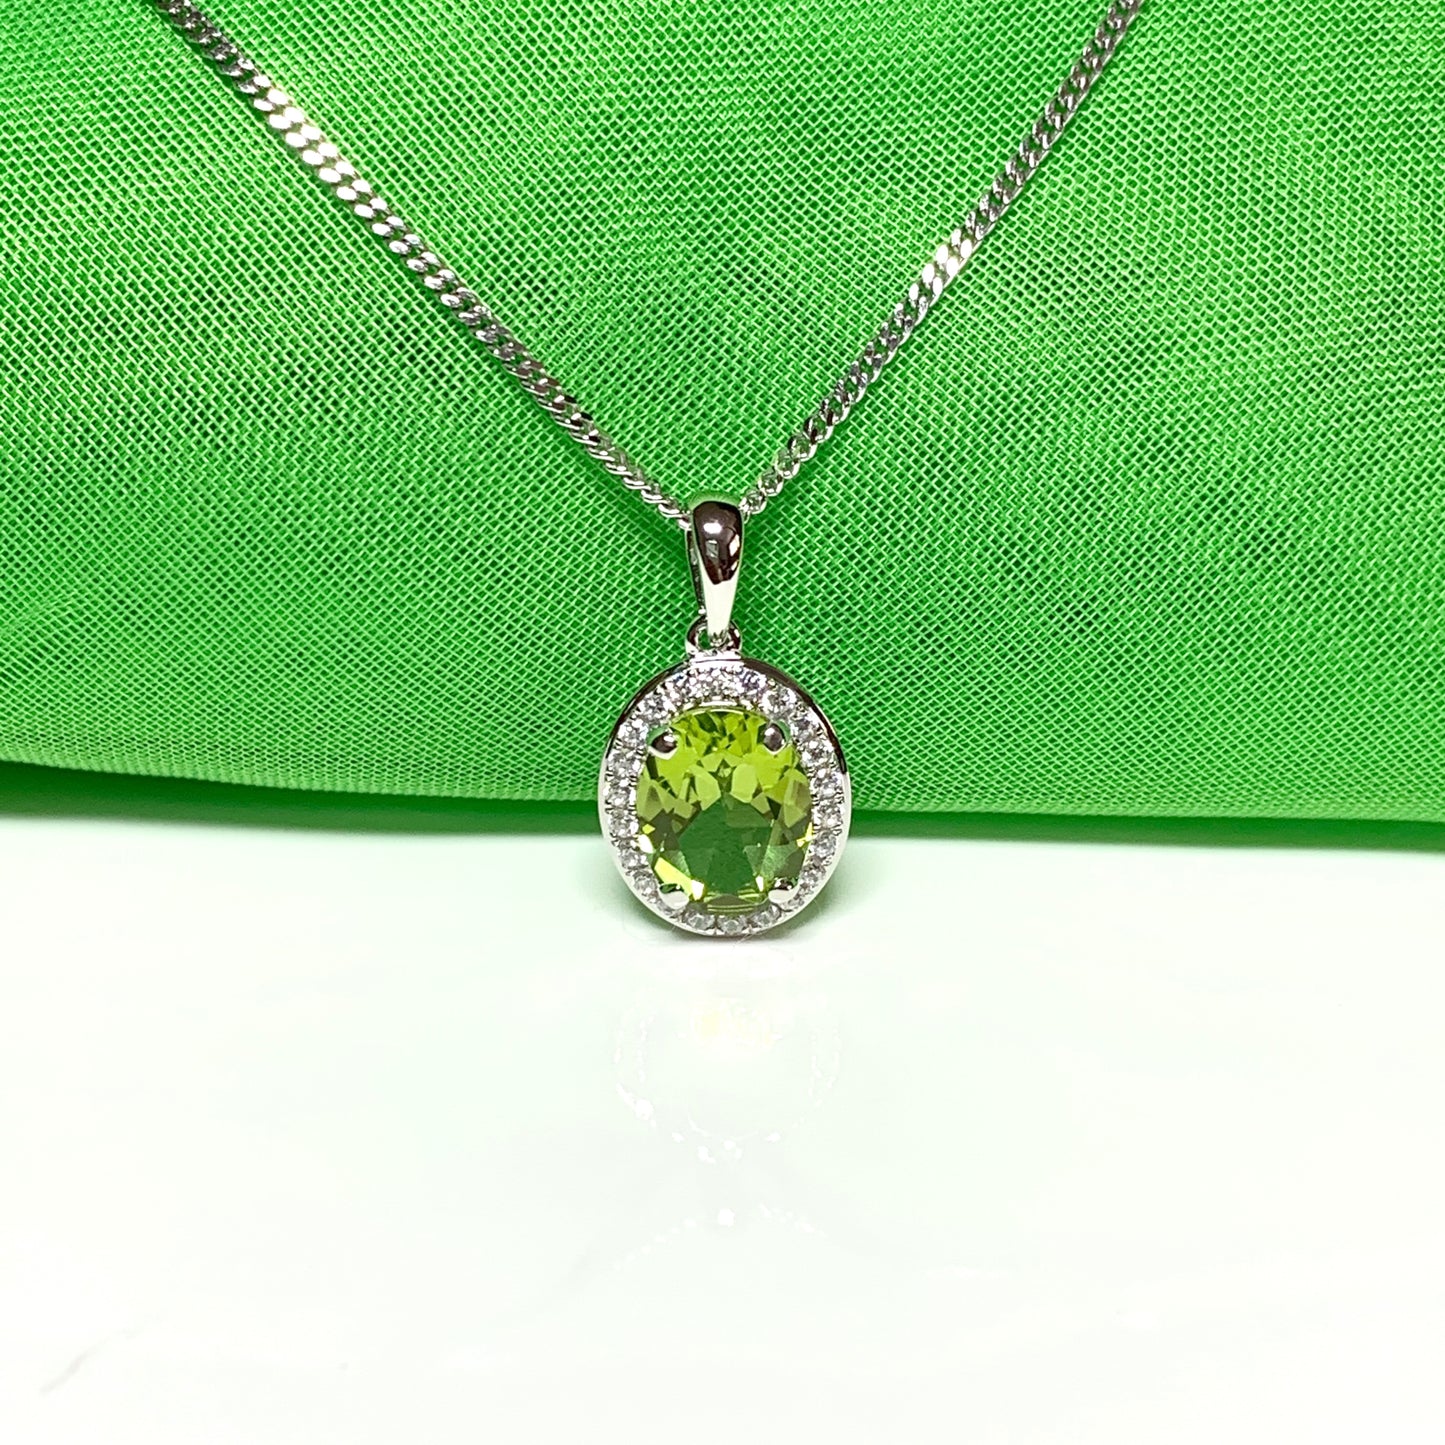 Oval peridot and cubic zirconia necklace